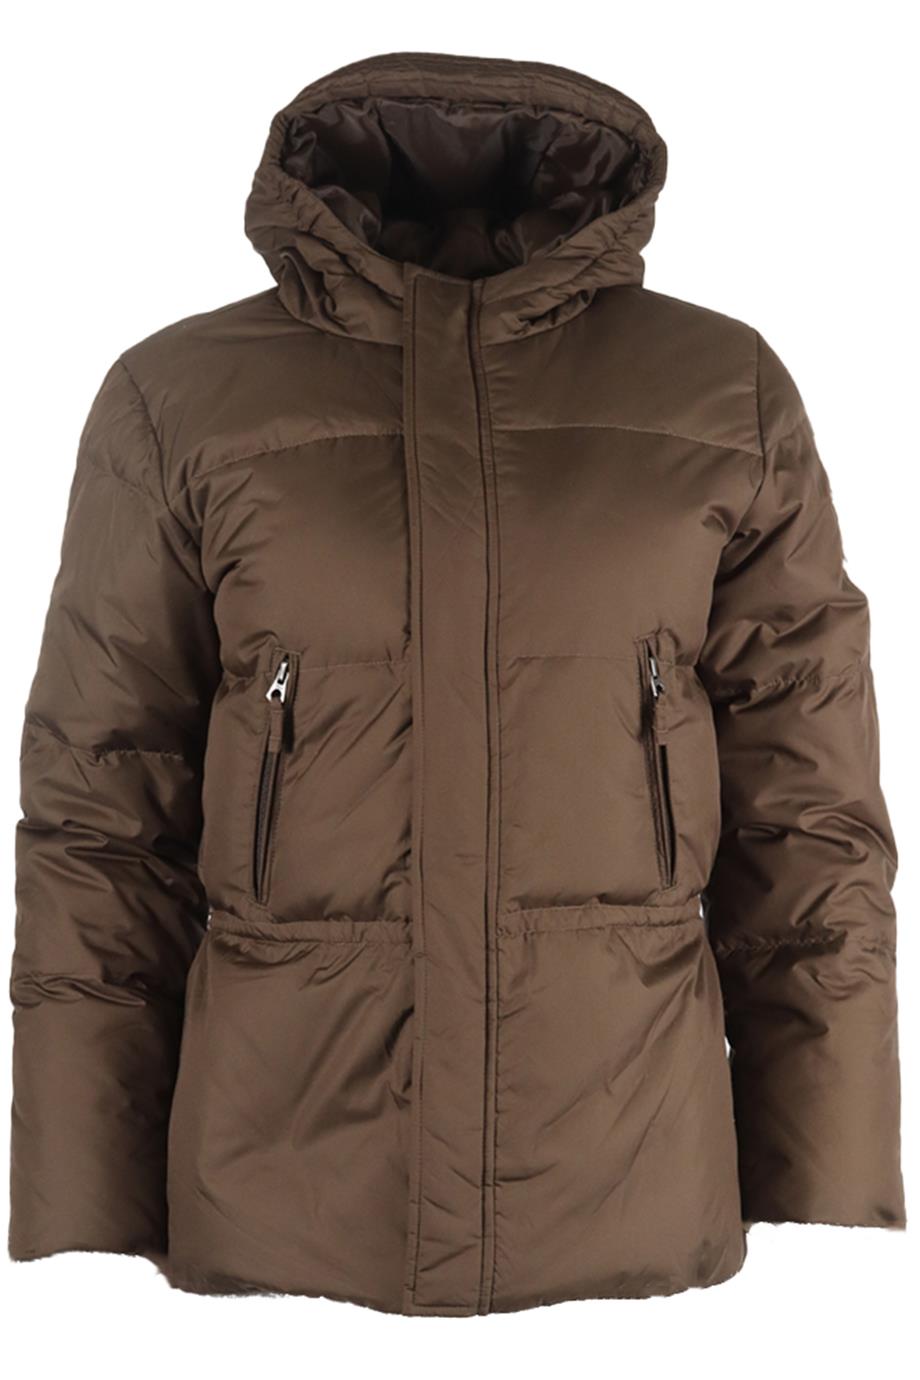 RALPH LAUREN QUILTED SHELL DOWN JACKET XLARGE